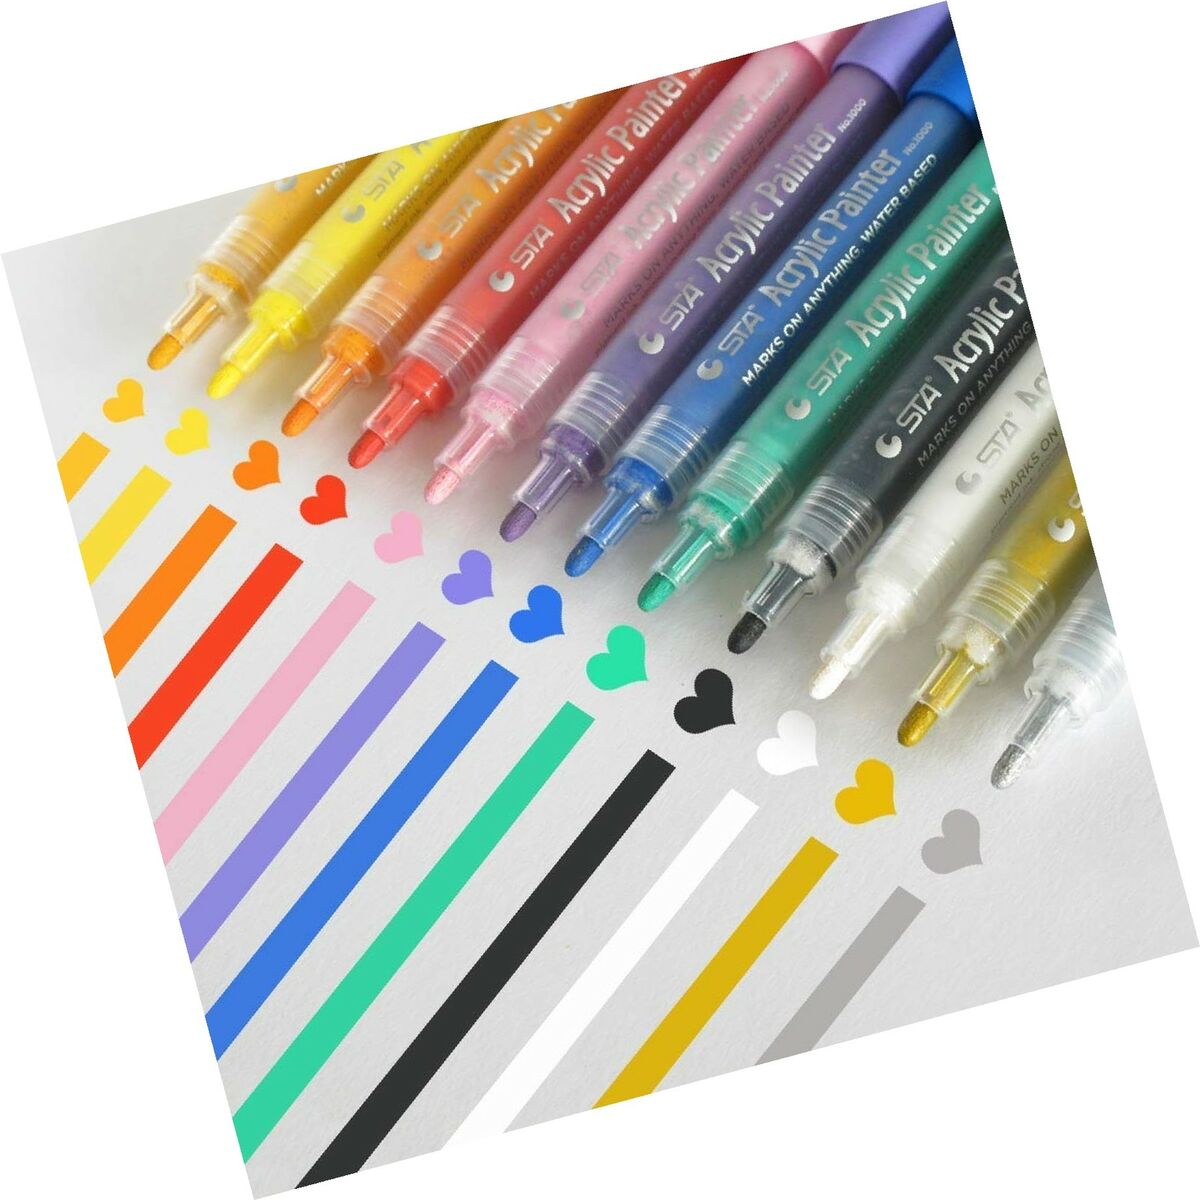 Acrylic Paint Markers Set - Permanent Paint Pens for Plastic, Glass, Ceramic, Wood, Cloth, Rubber, Rock and Any Surface. 12 Water Based. Water